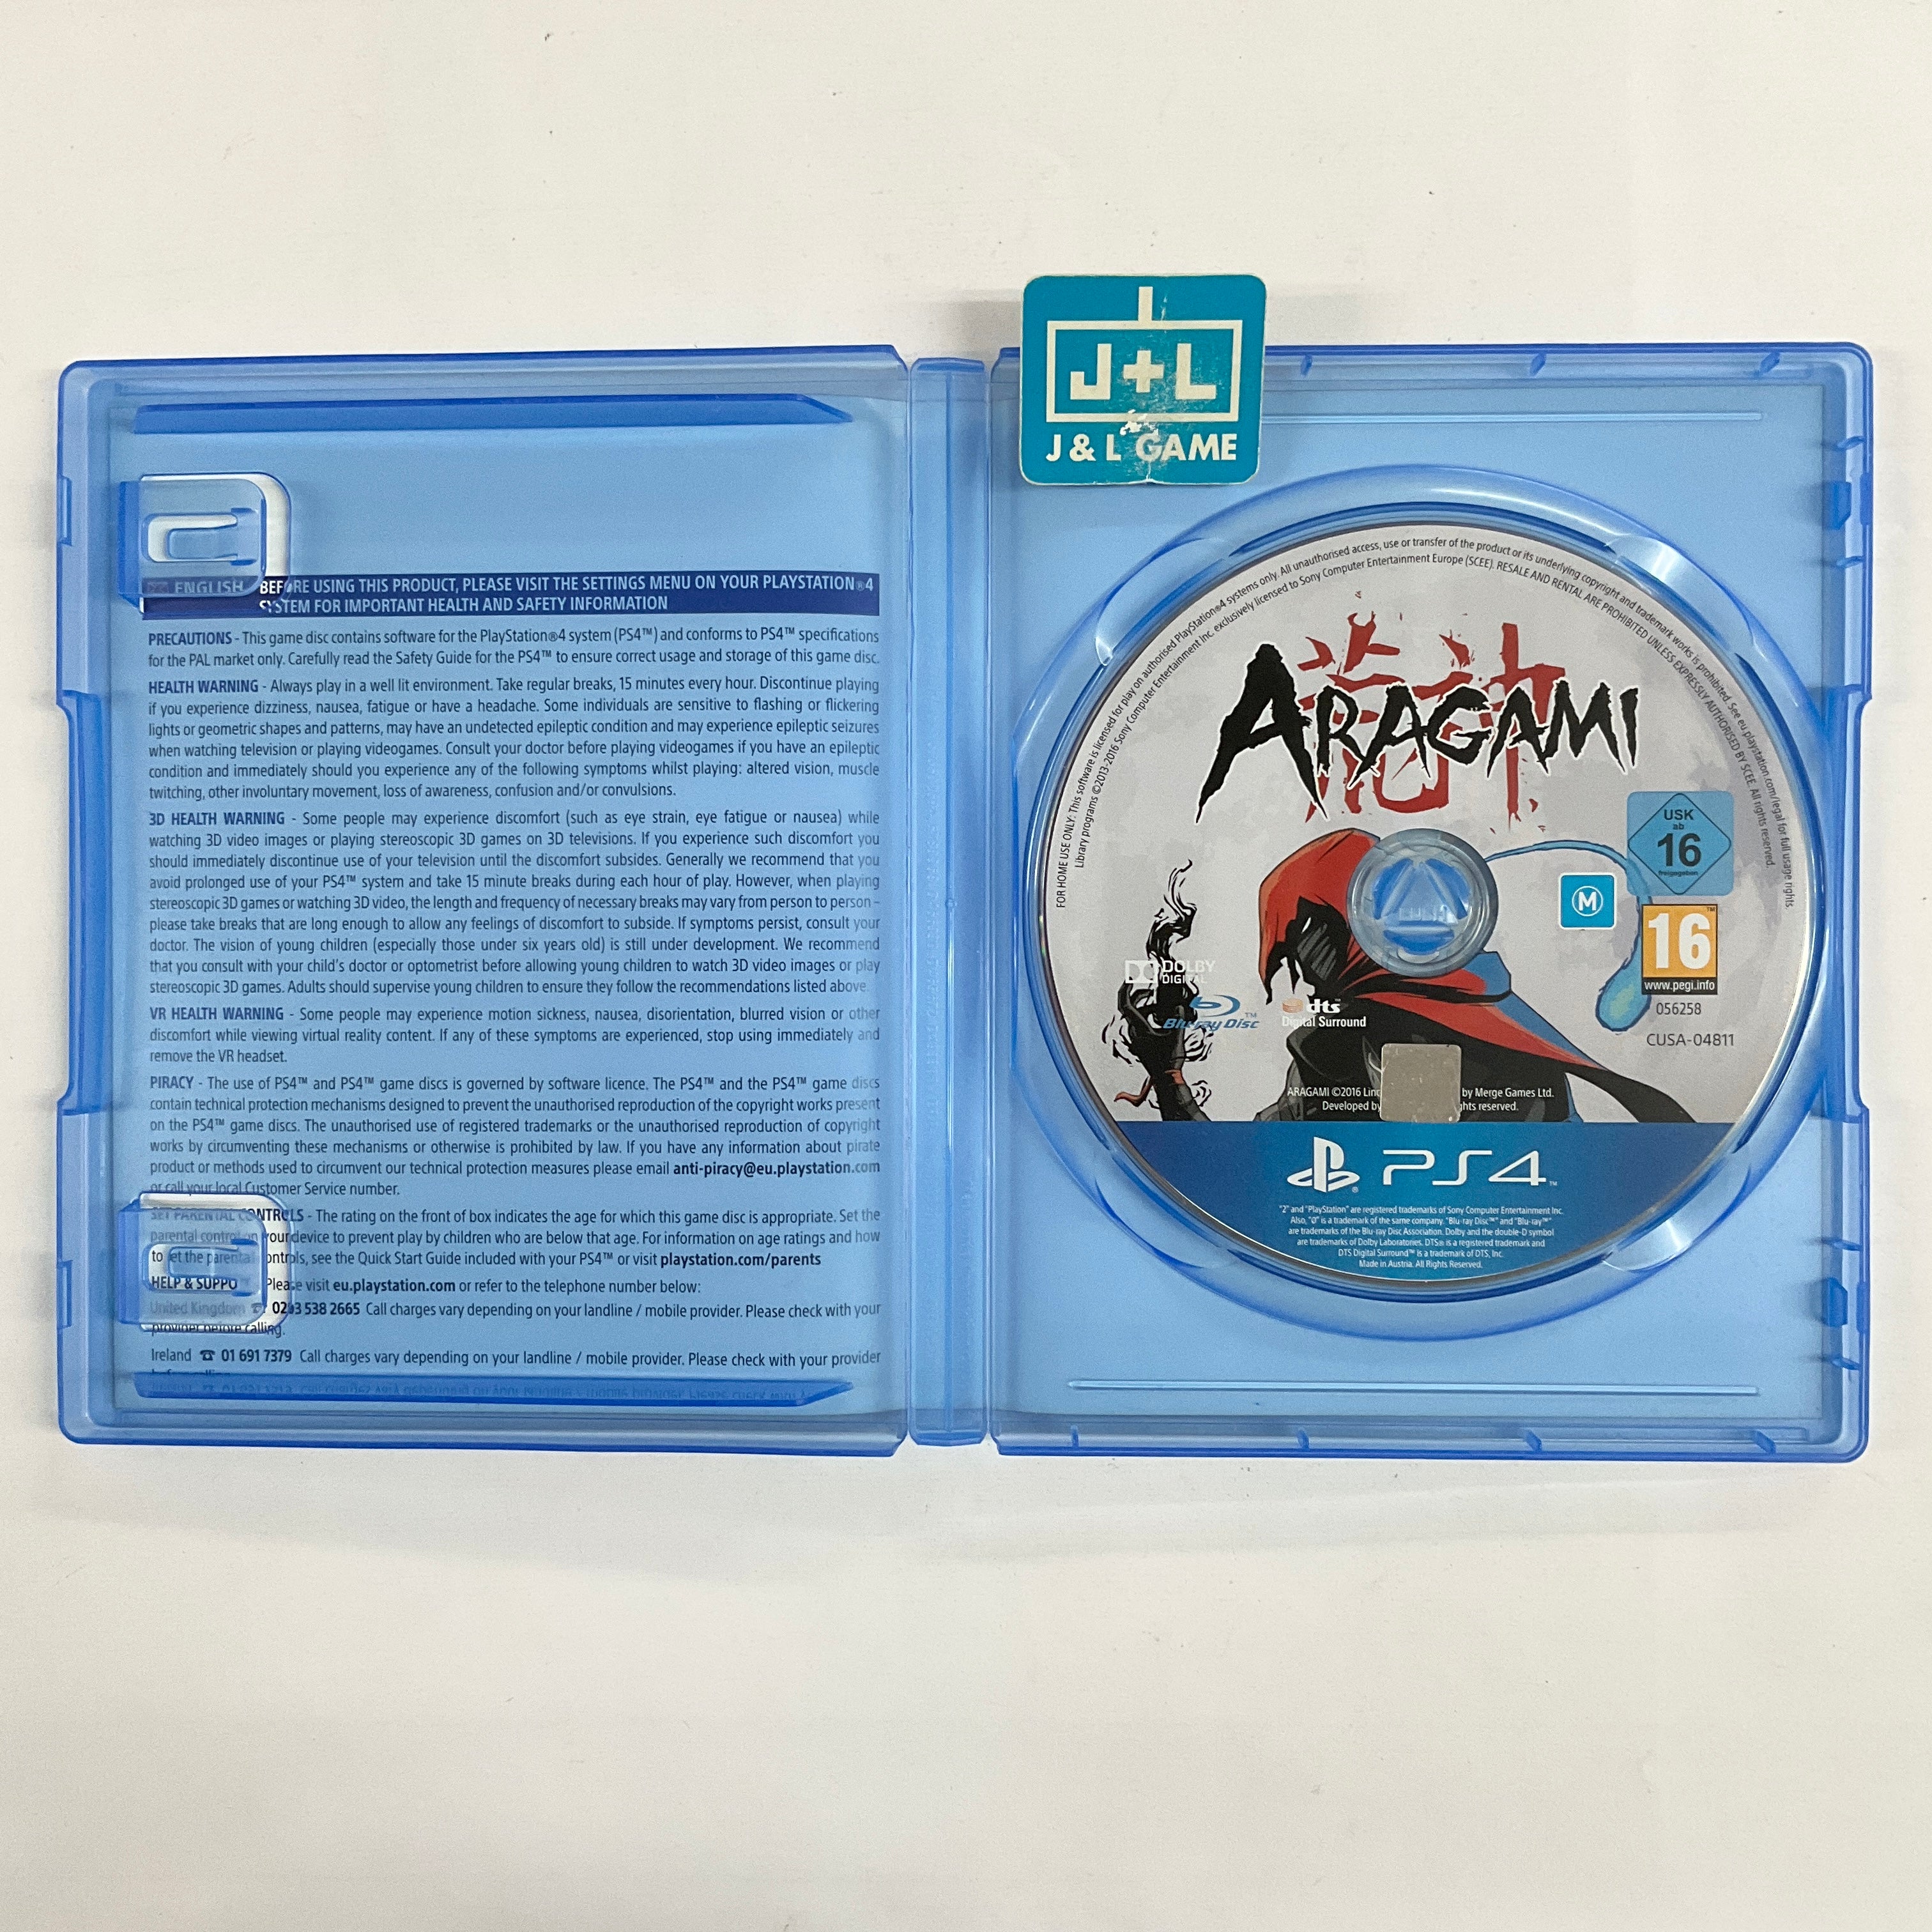 Aragami - (PS4) PlayStation 4 [Pre-Owned] (European Import) Video Games Merge Games   